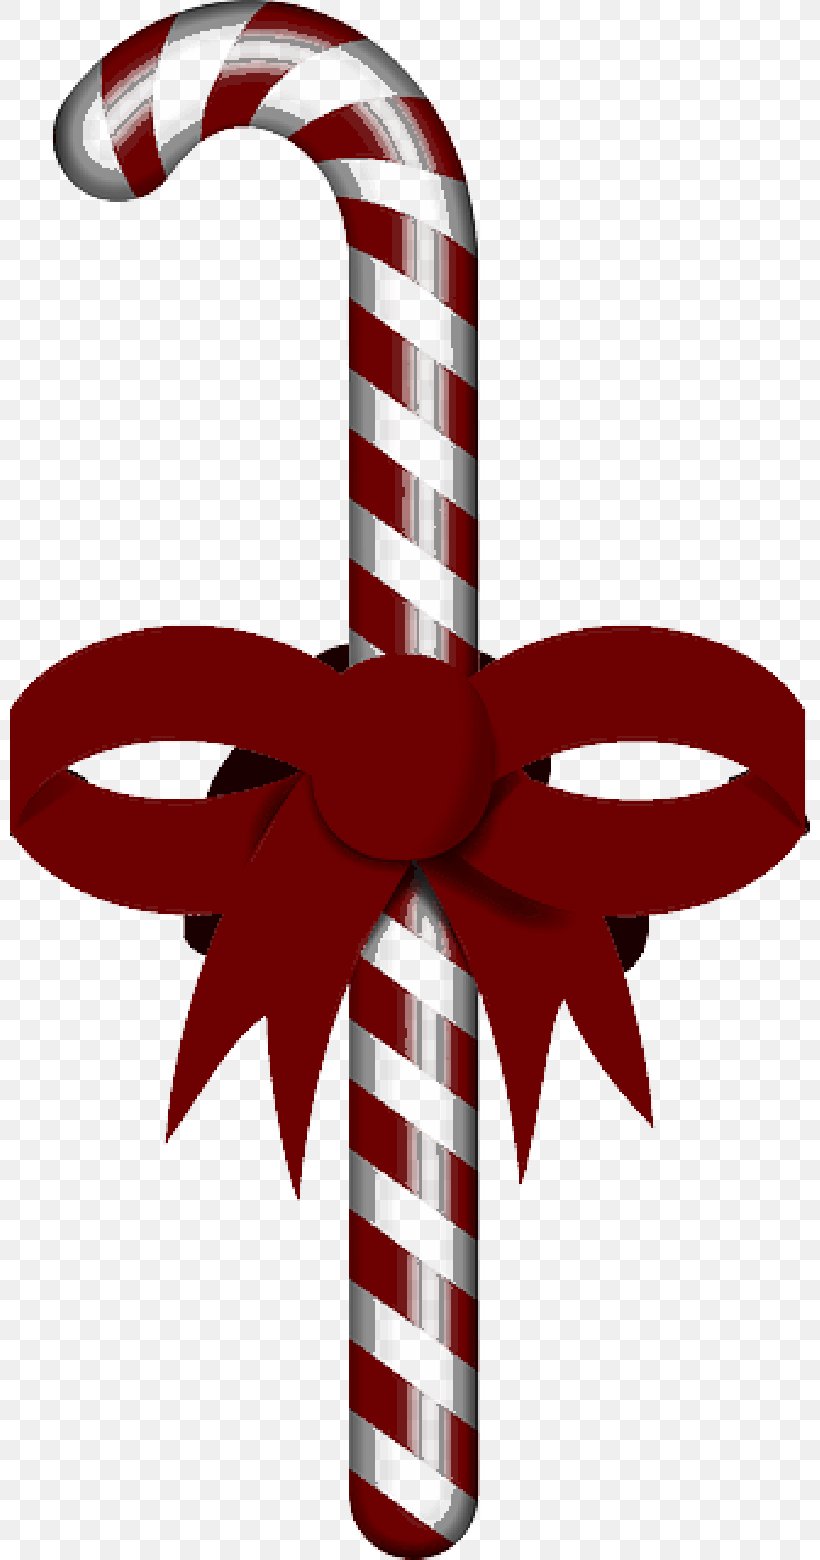 Candy Cane Ribbon Candy Stick Candy Lollipop Clip Art, PNG, 800x1560px, Candy Cane, Candy, Candy Corn, Christmas, Christmas Day Download Free